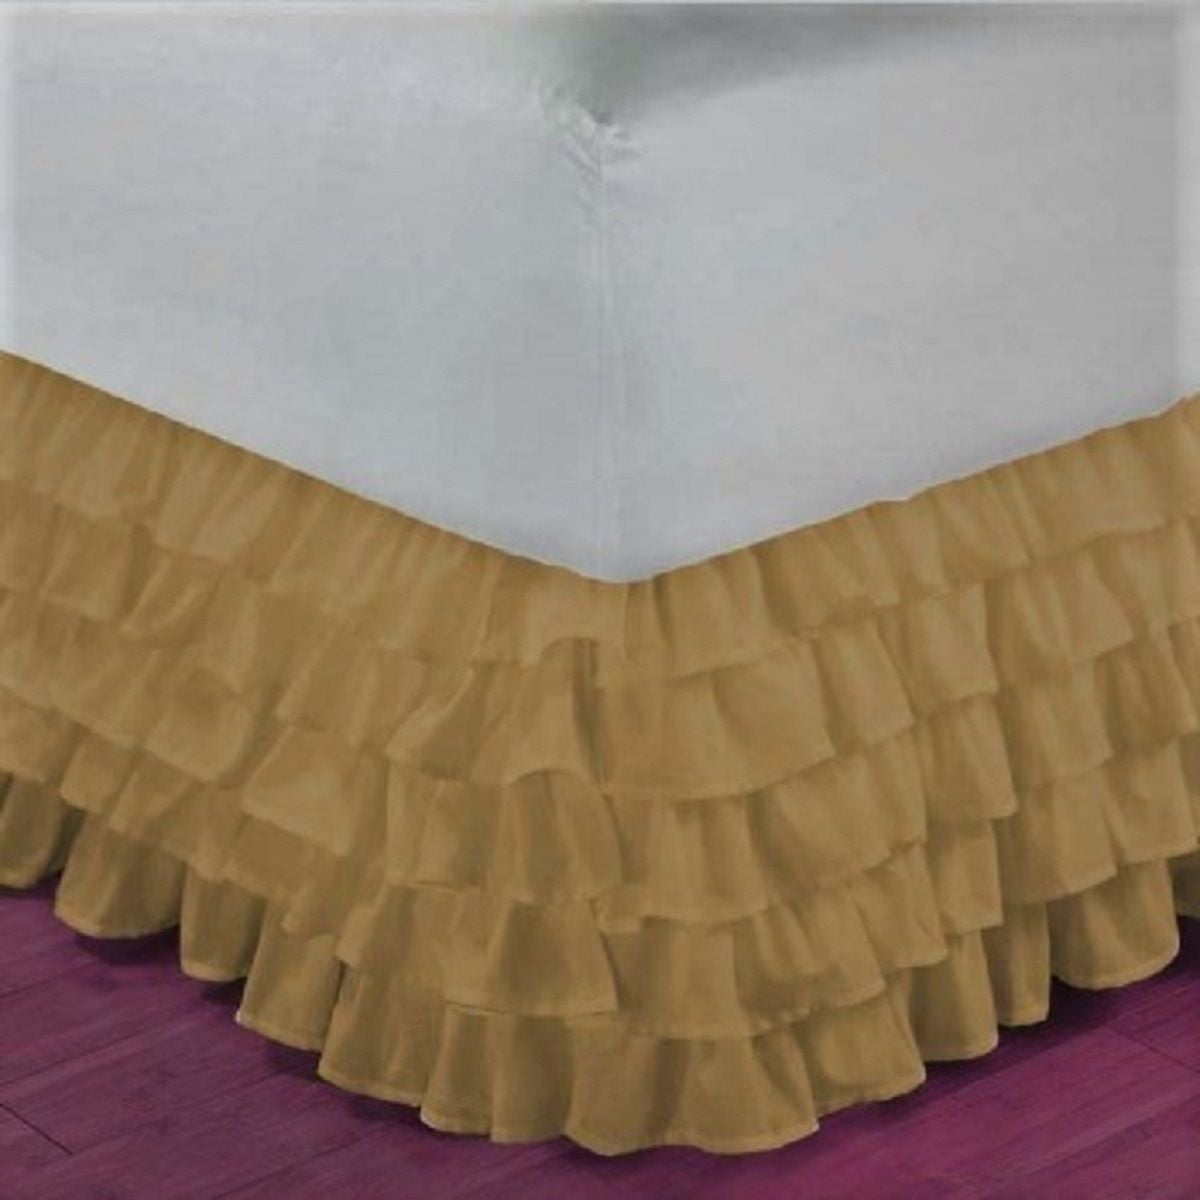 NEW 1PC SOLID PLAIN BED DRESSING RUFFLE SKIRT 20" INCH DROP 5 LAYERED IN 4 SIZES 